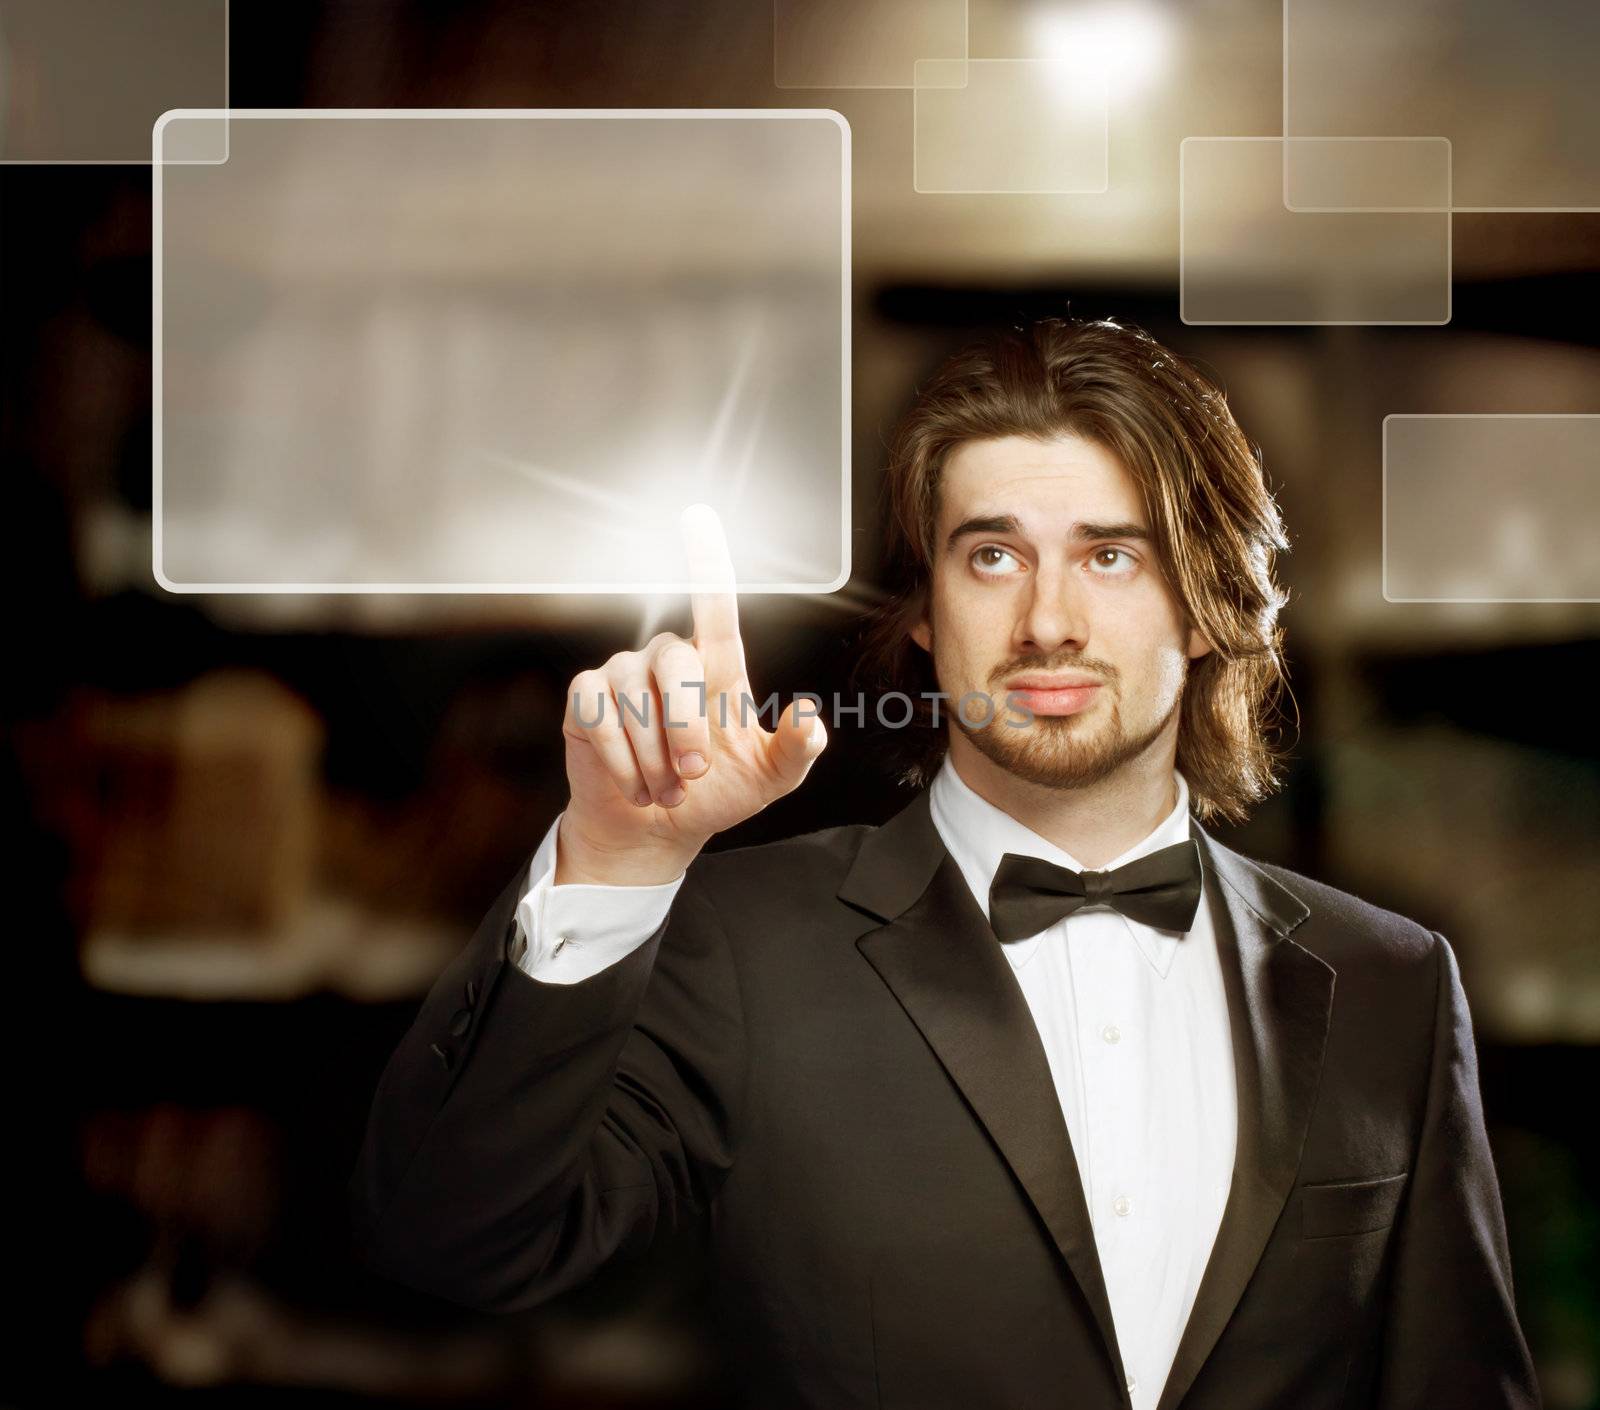 Man with Bow Tie  Looking and Pointing a Touch Screen